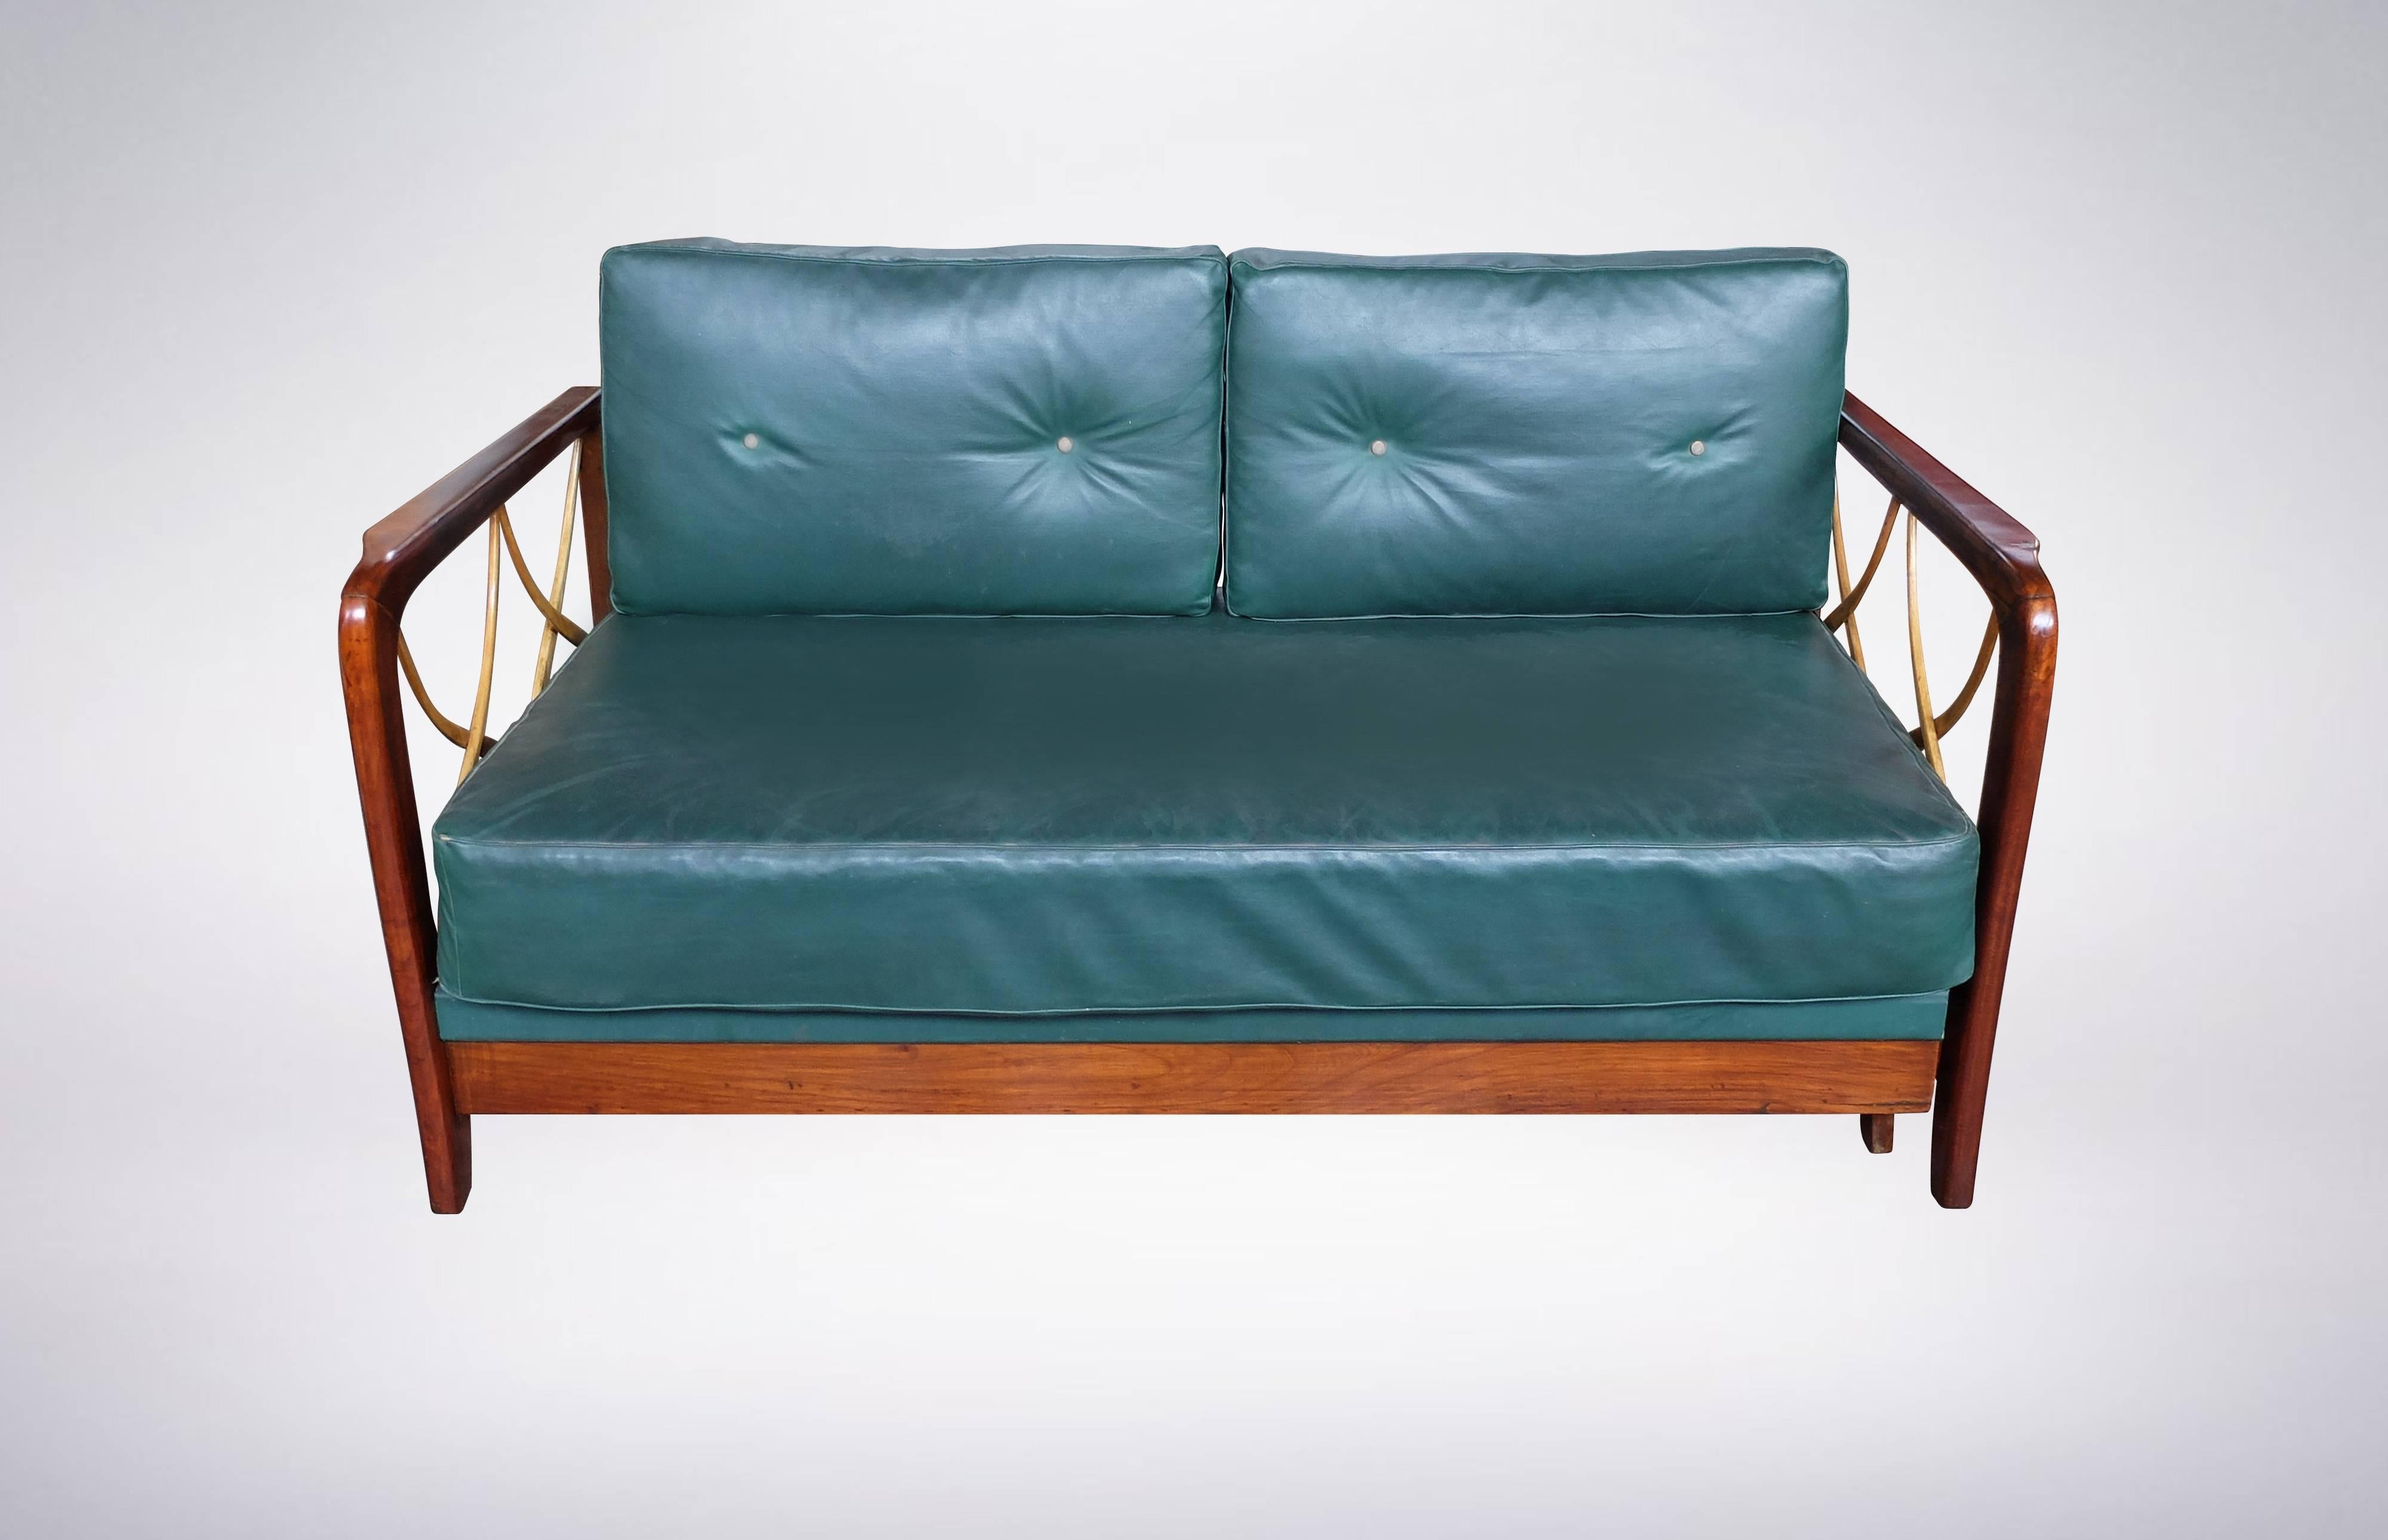 Settee that transforms into daybed maintained with original wooden fittings and green leather upholstery. 
Side collapses that turns it into daybed.